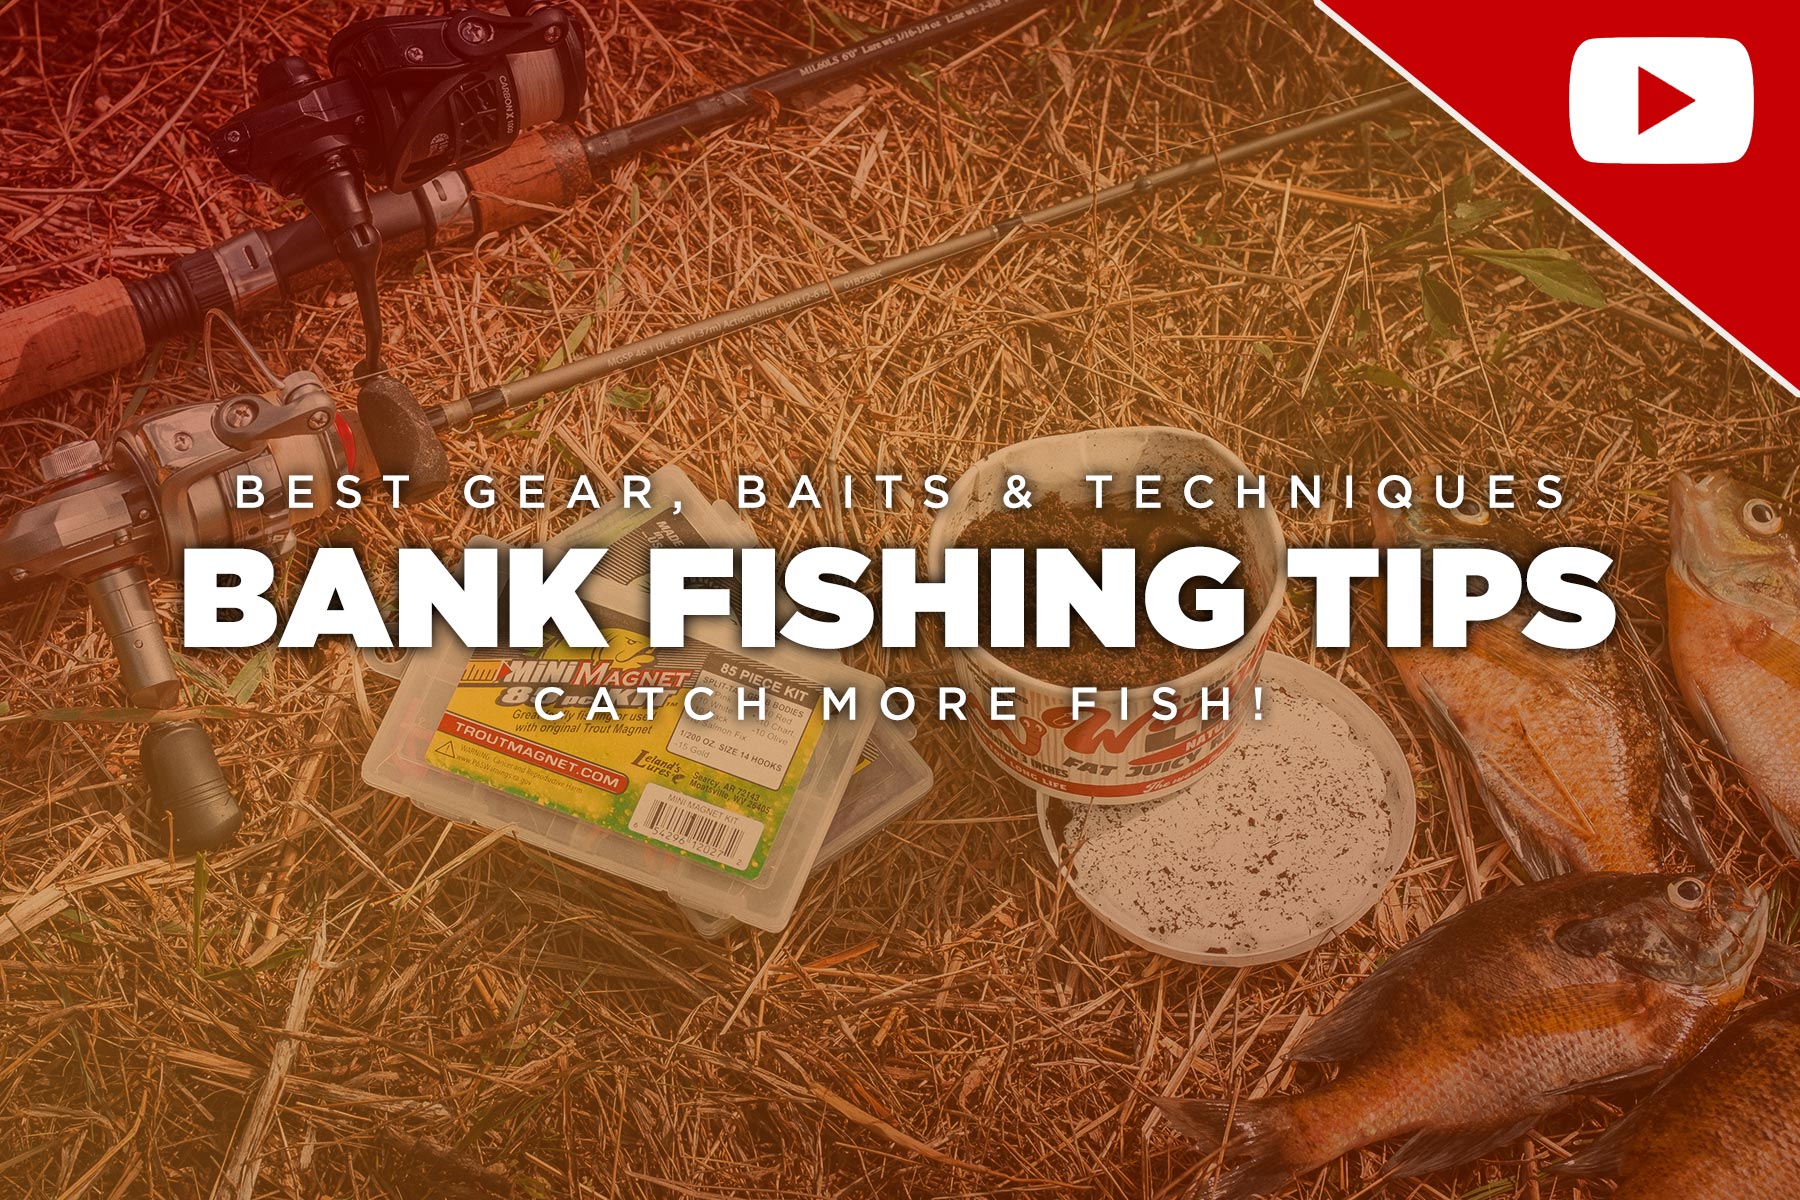 Bank Fishing Tips • Catch MORE FISH & Have FUN Doing It!